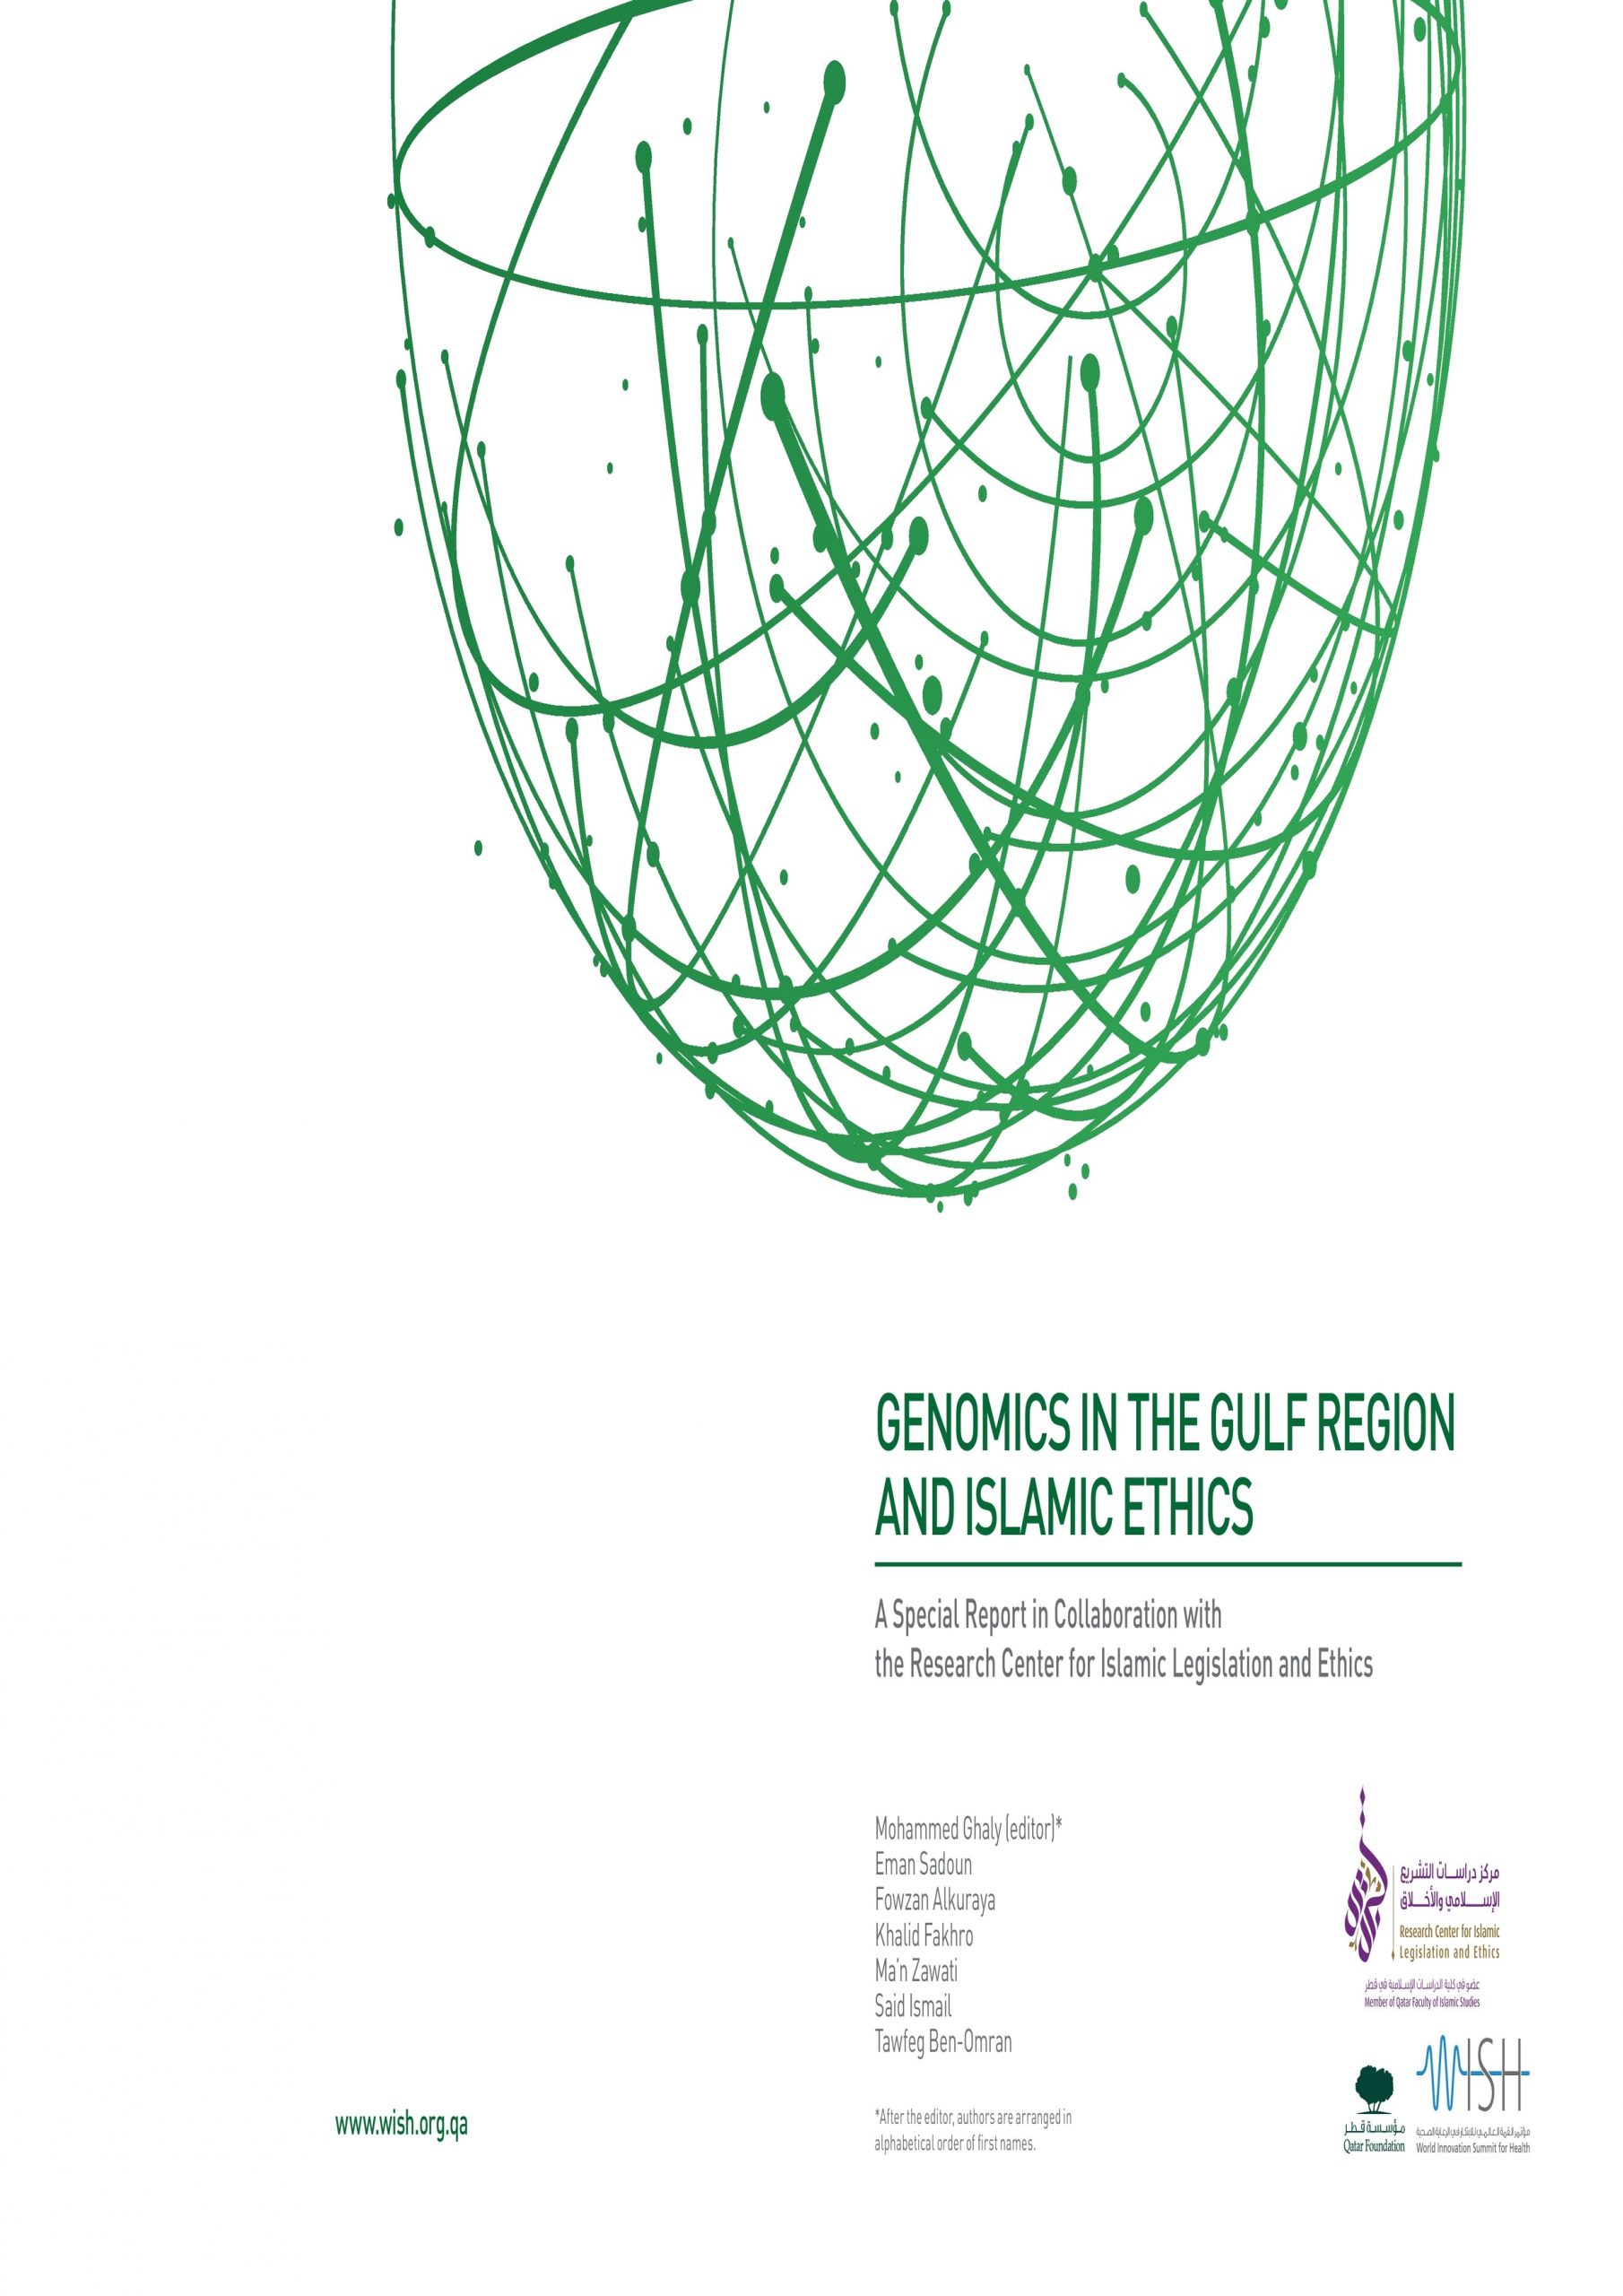 Genomics in the Gulf Region and Islamic Ethics